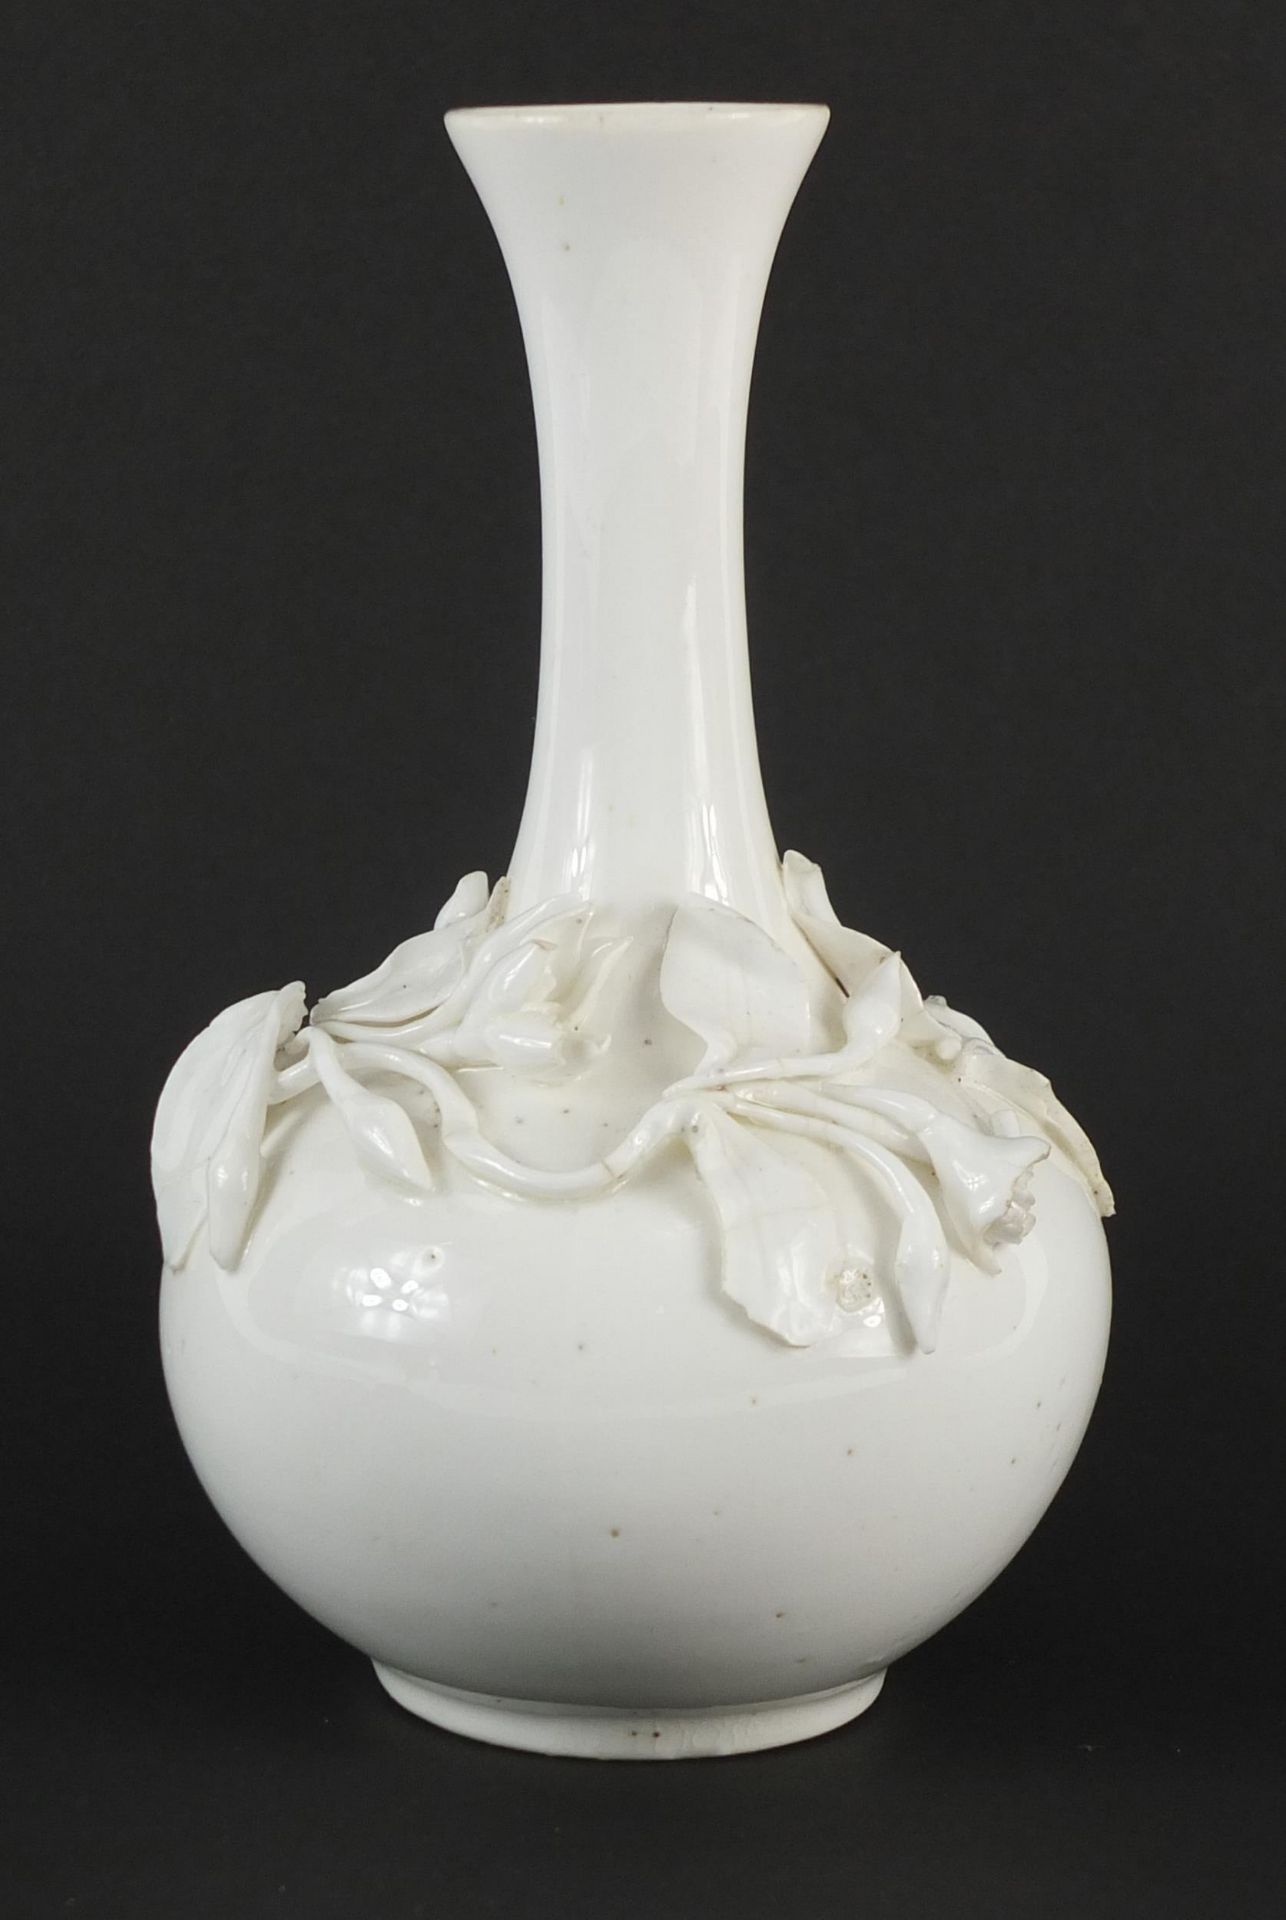 19th century Derby porcelain blanc de chine vase decorated in relief with flowers, 16cm high